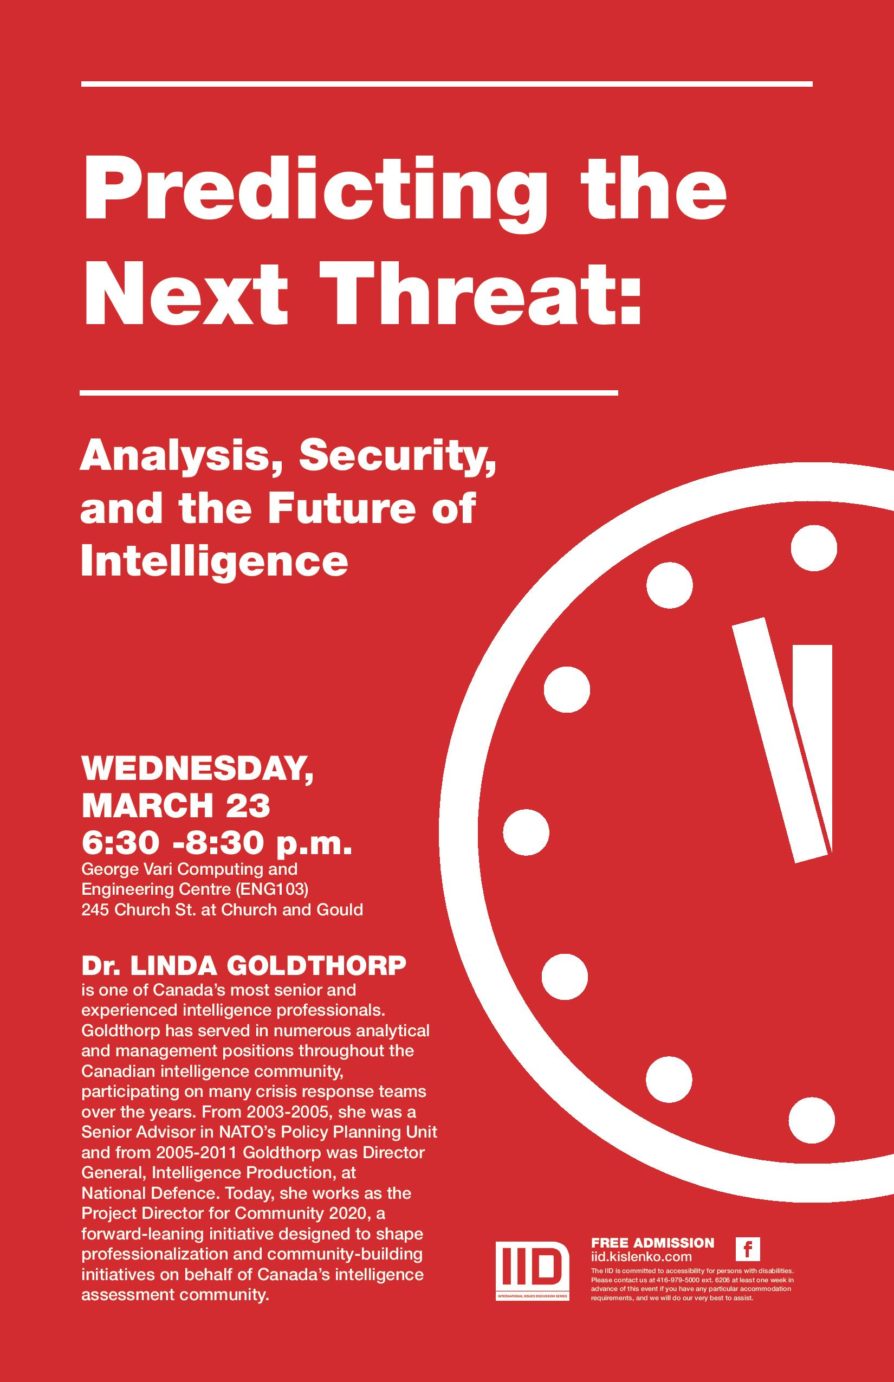 Predicting the Next Threat: Analysis, Security, and the Future of Intelligence—March 23, 2016